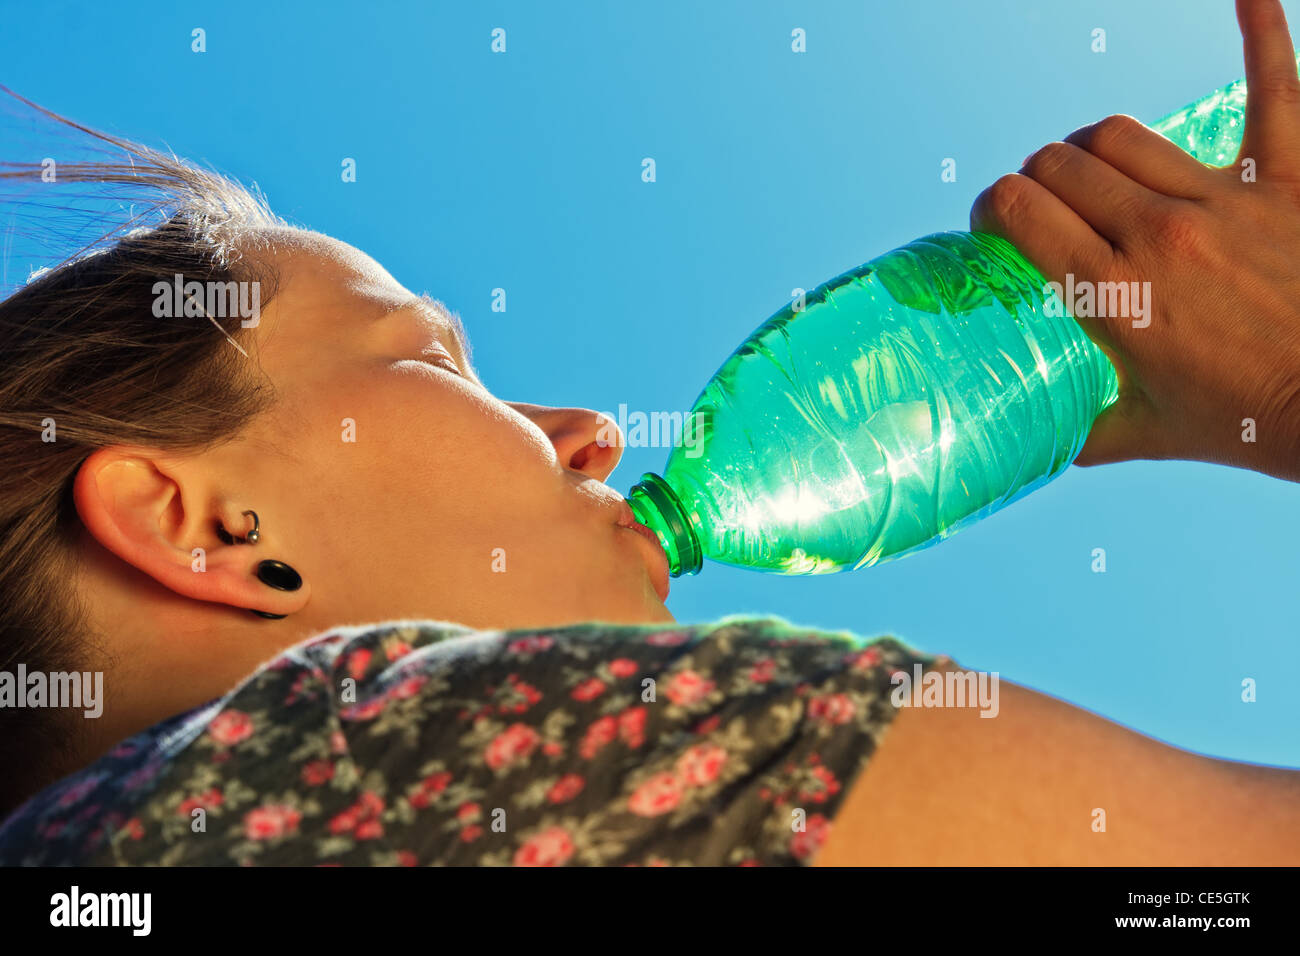 Thirsty woman is drinking fresh water on a sunny day Stock Photo